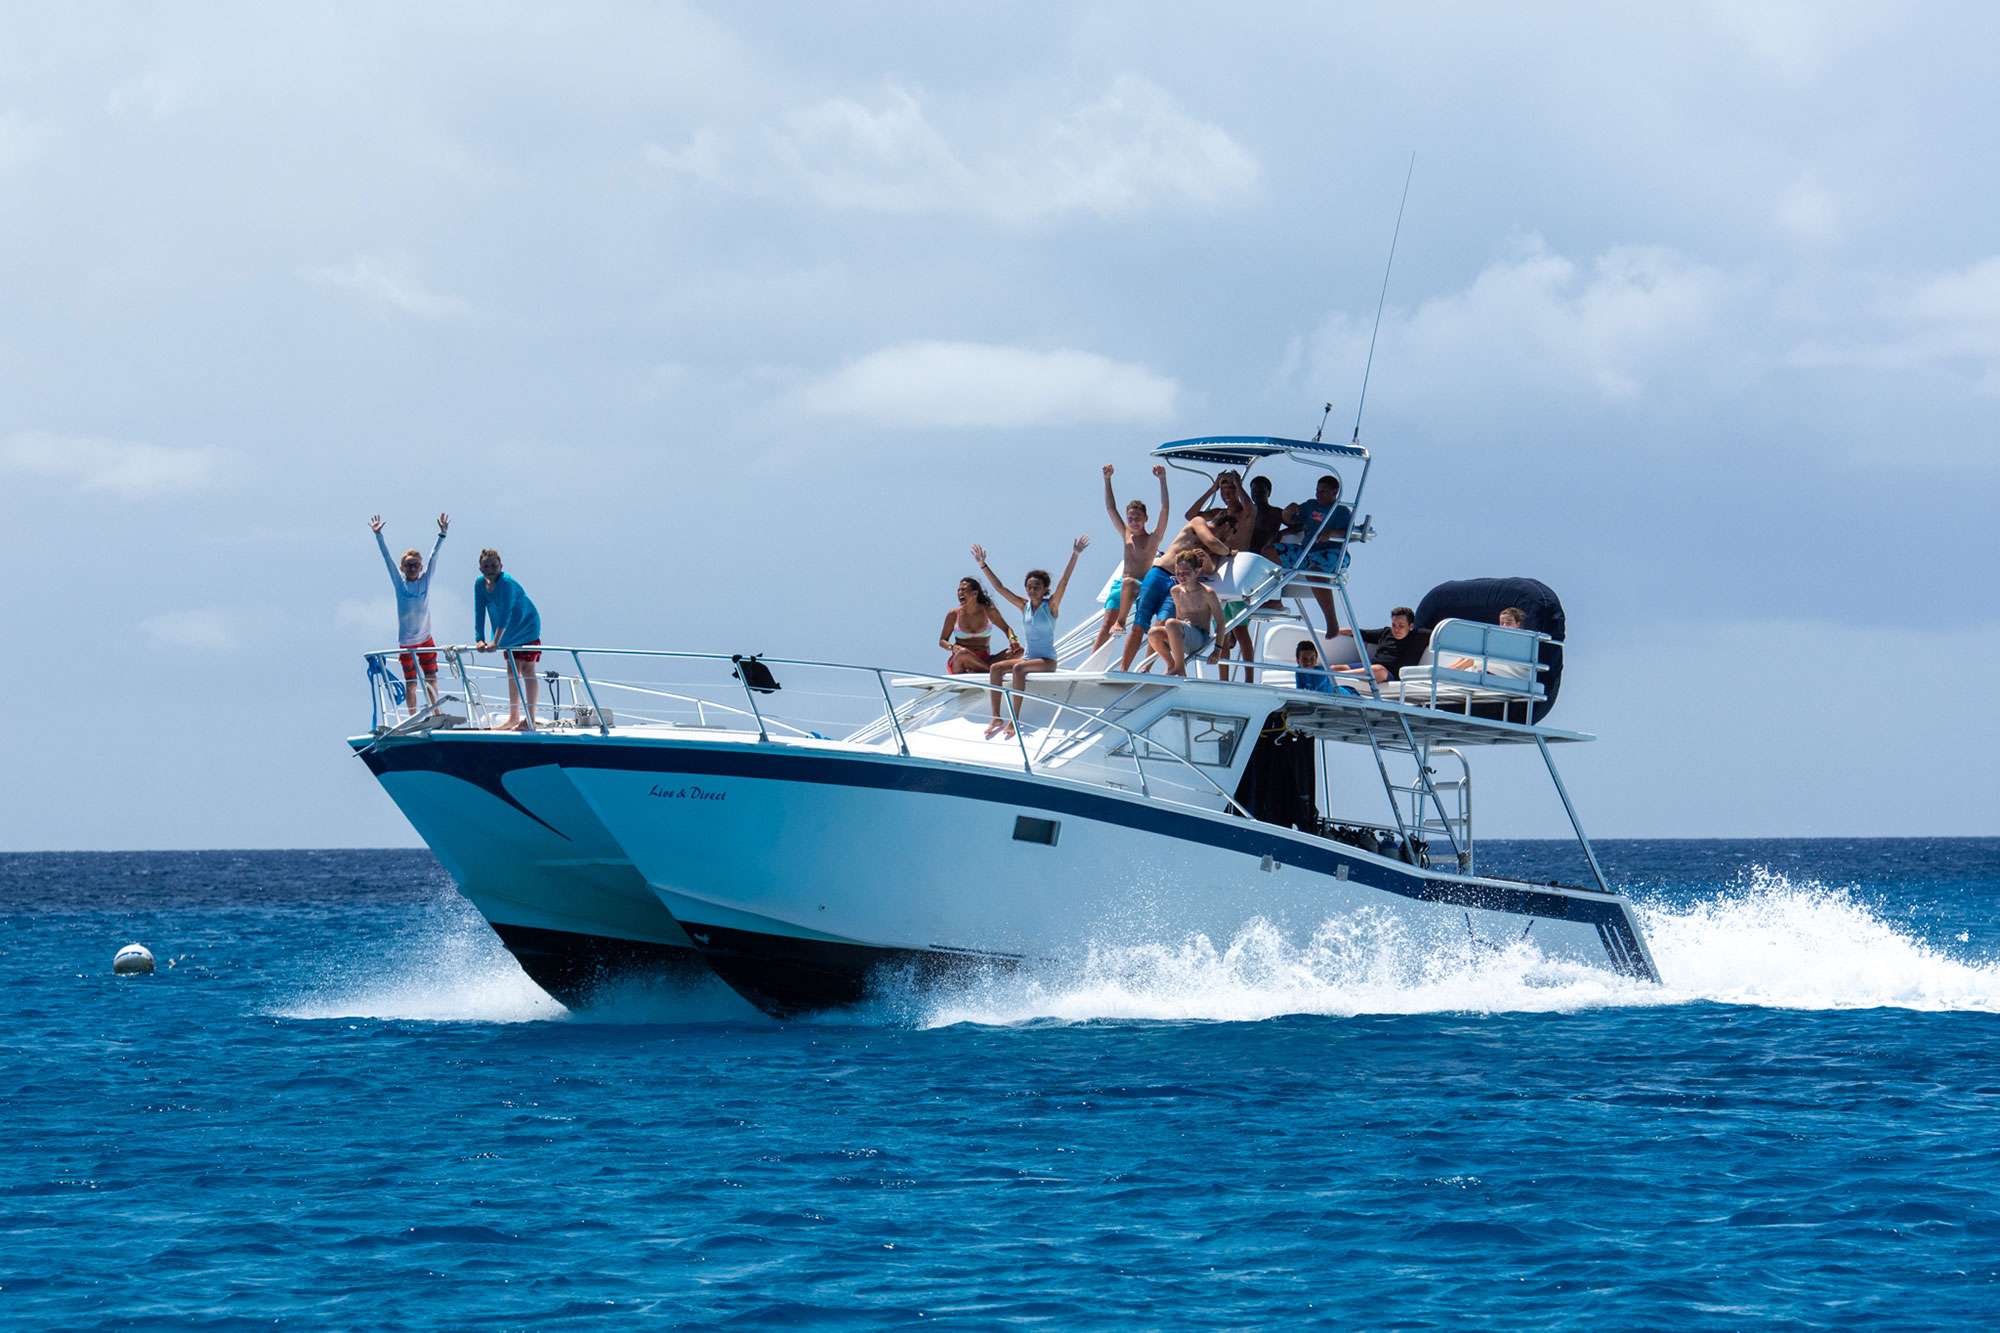 Boat rental in the Turks and Caicos couldnât be easier